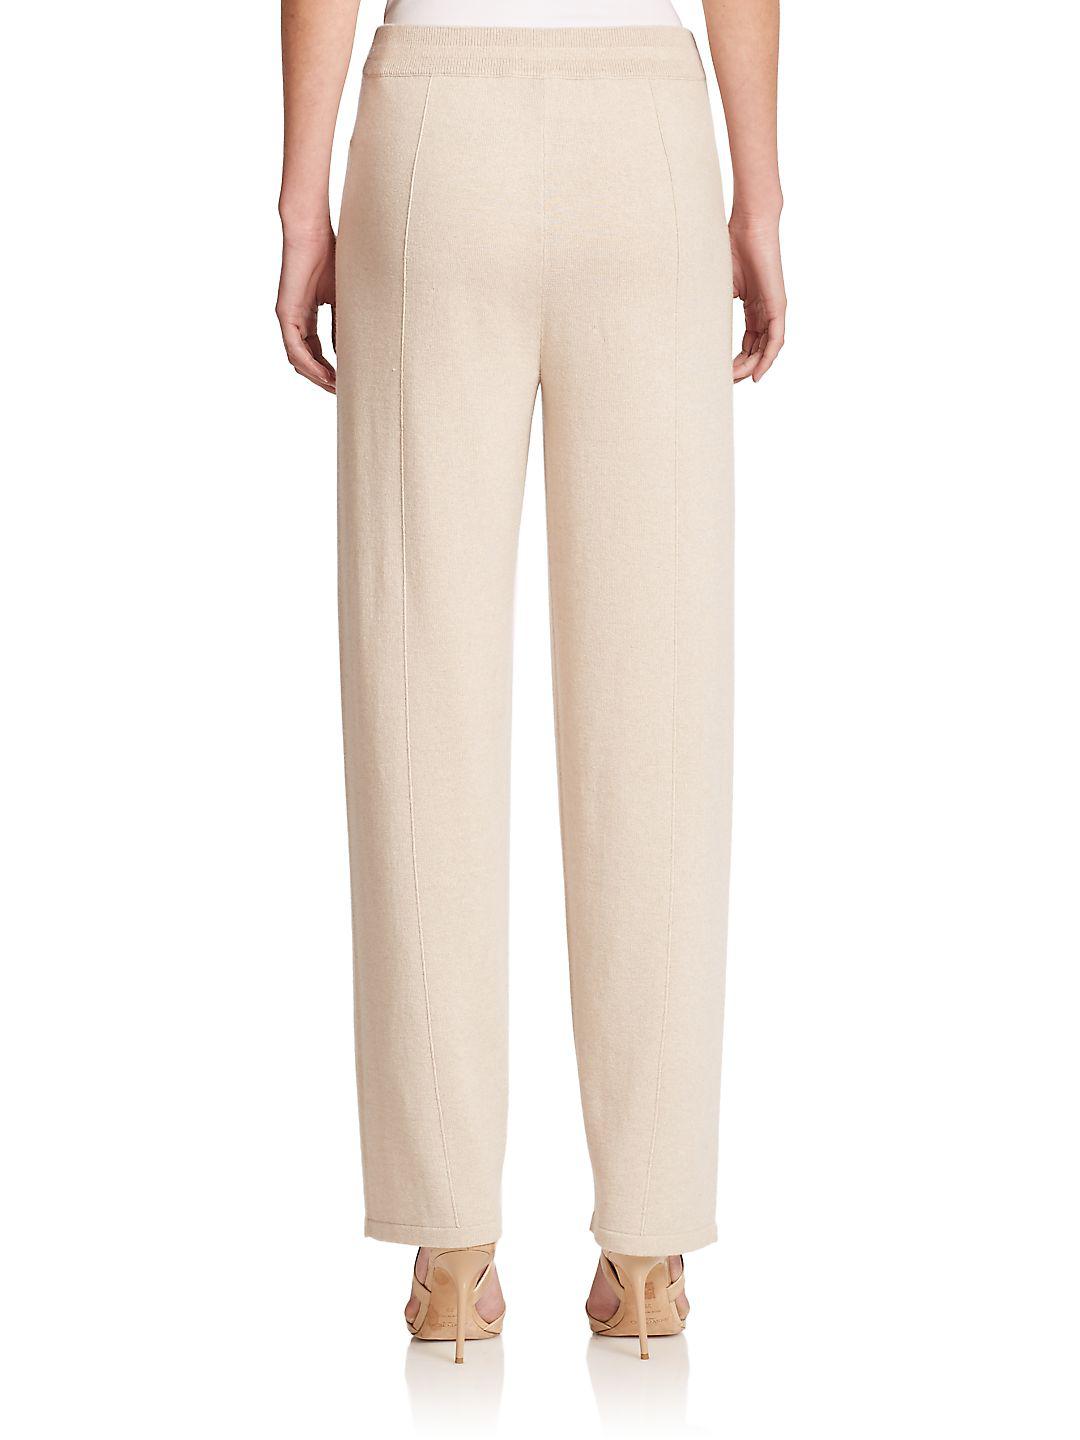 Beige Silk Pants for Women, Made in Canada, Espino Silk